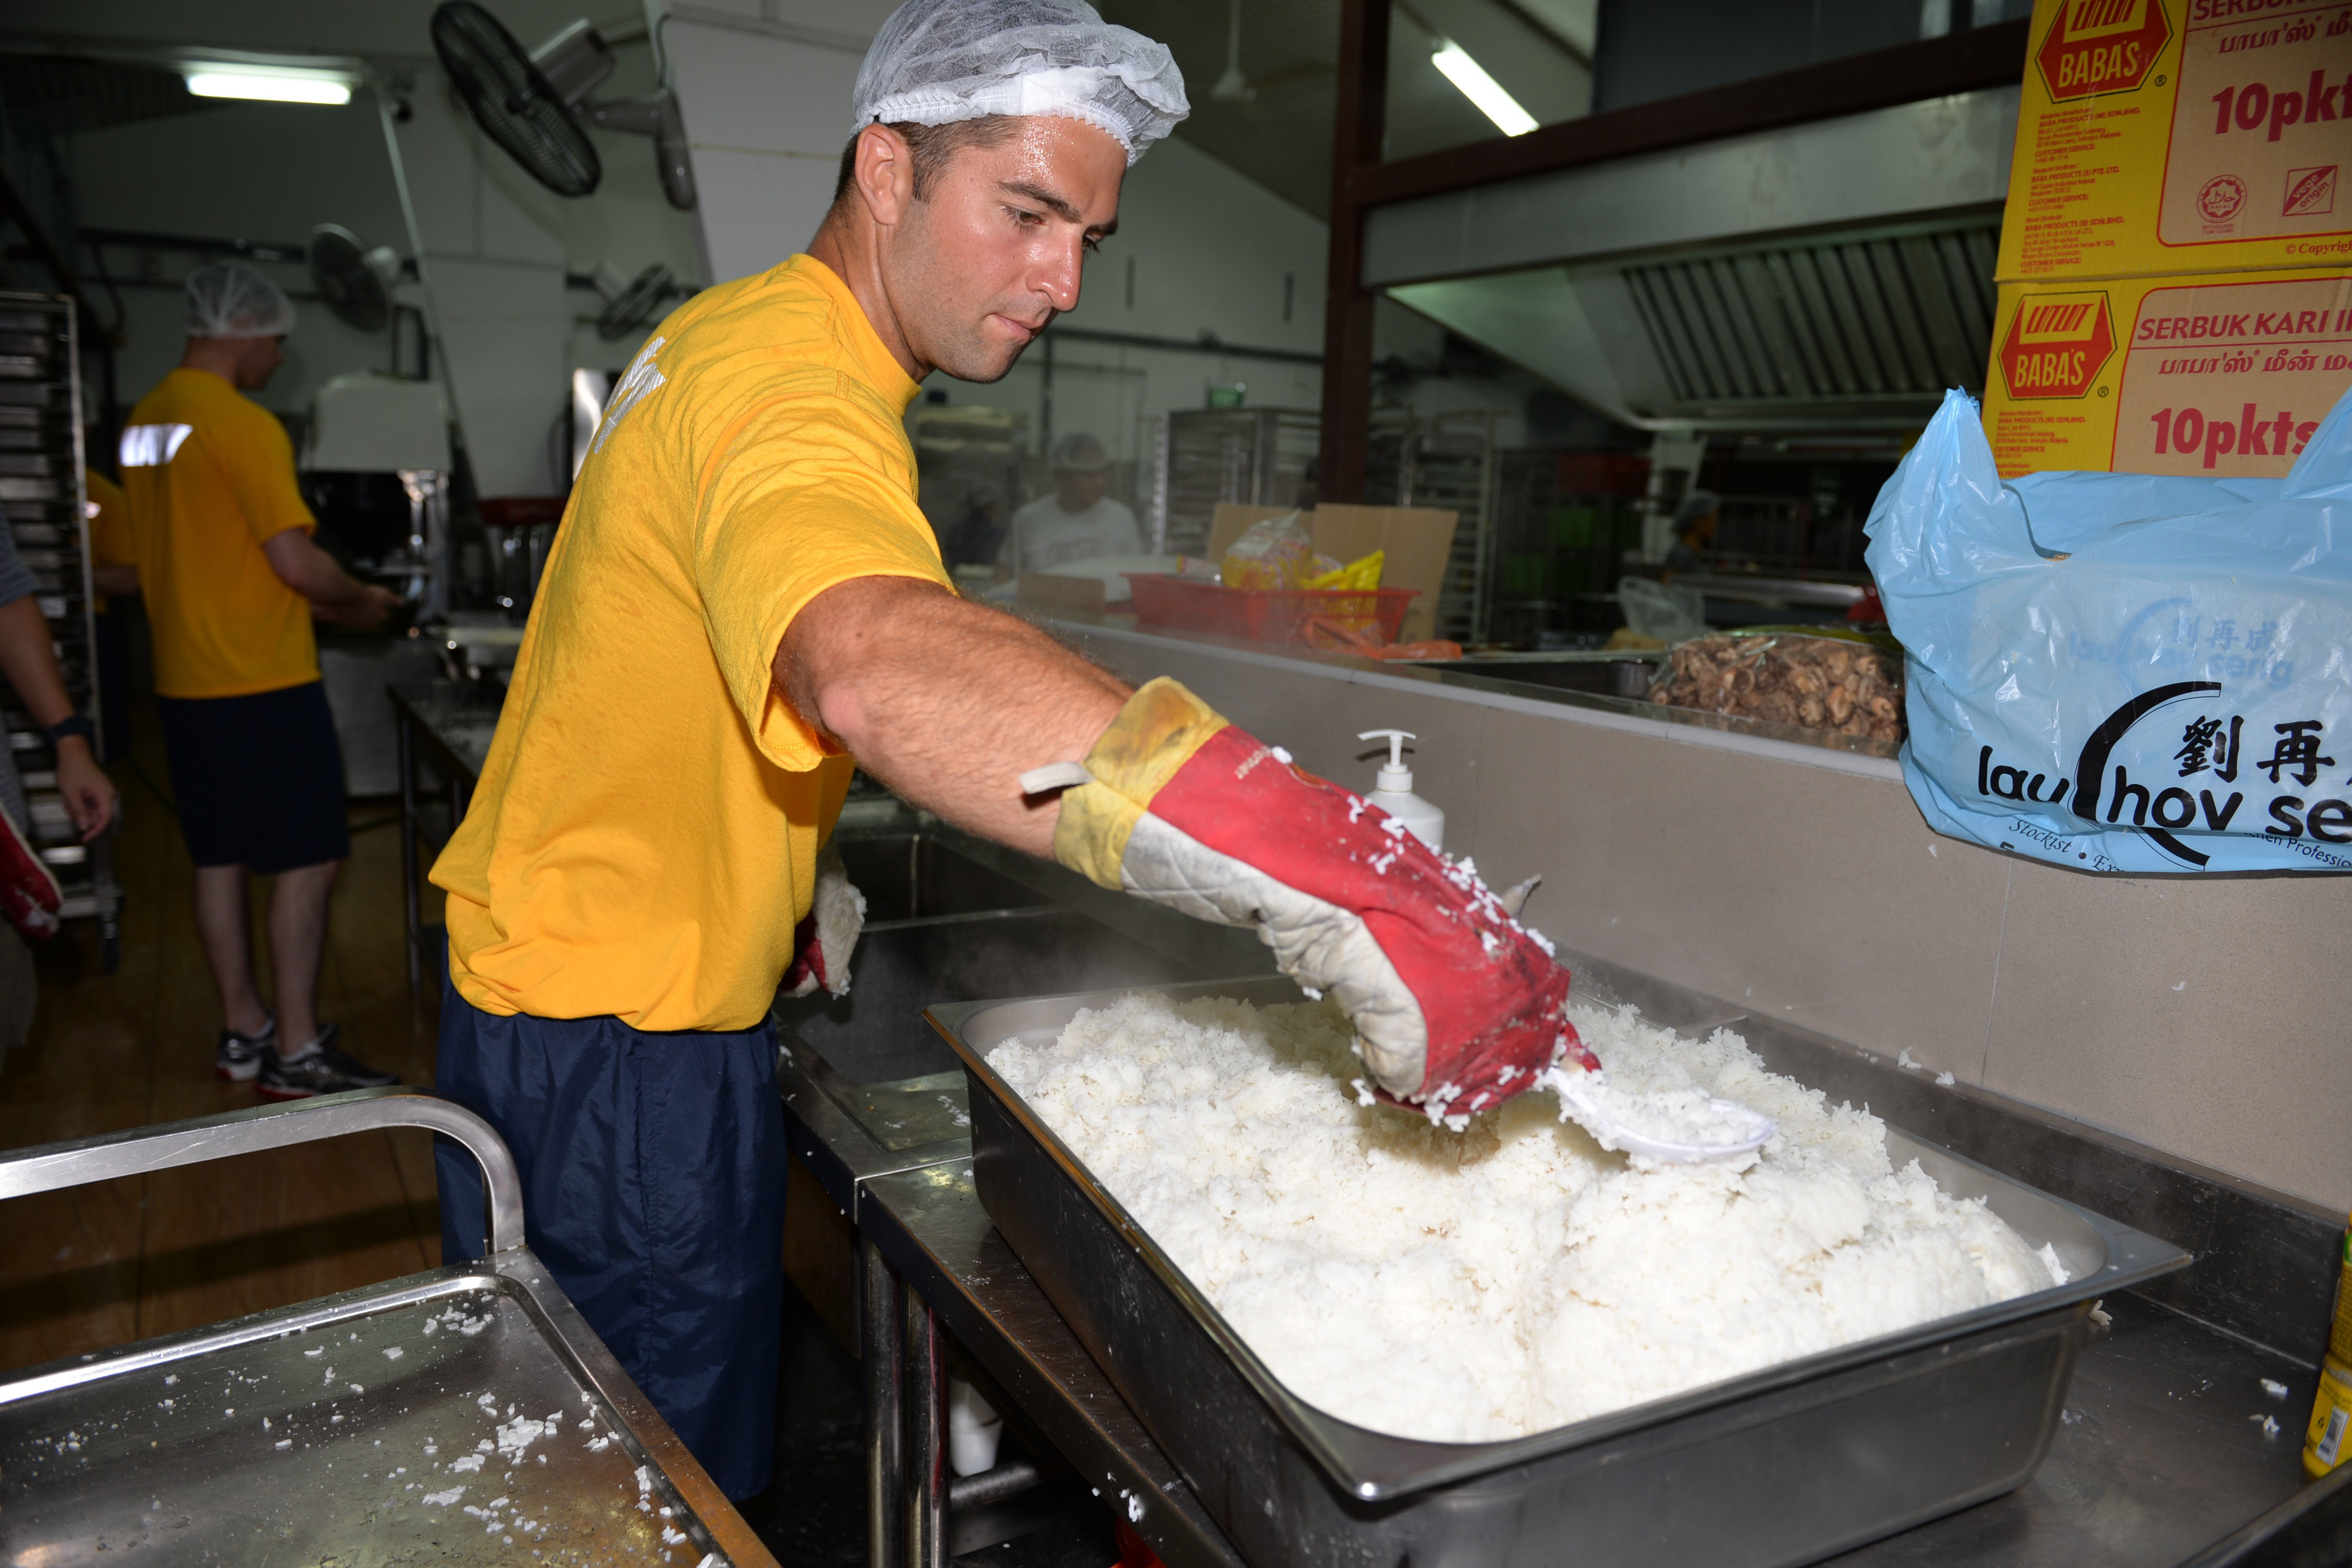 SINGAPORE (May 21, 2016) - U.S. Navy LT. Mike Burbelo, assistant marine transportation specialist, Military Sealift Command Far East (MSCFE), prepares and cooks a tray of white rice during a volunteer event at Singapore's Willing Hearts charity organization and soup kitchen May 21, 2016. Burbelo, a Daytona, Fla. native, along with four other Sailors participated in a community relations event as part of a theater-specific training course with MSCFE. (Official U.S. Navy photo by Marc Ayalin)